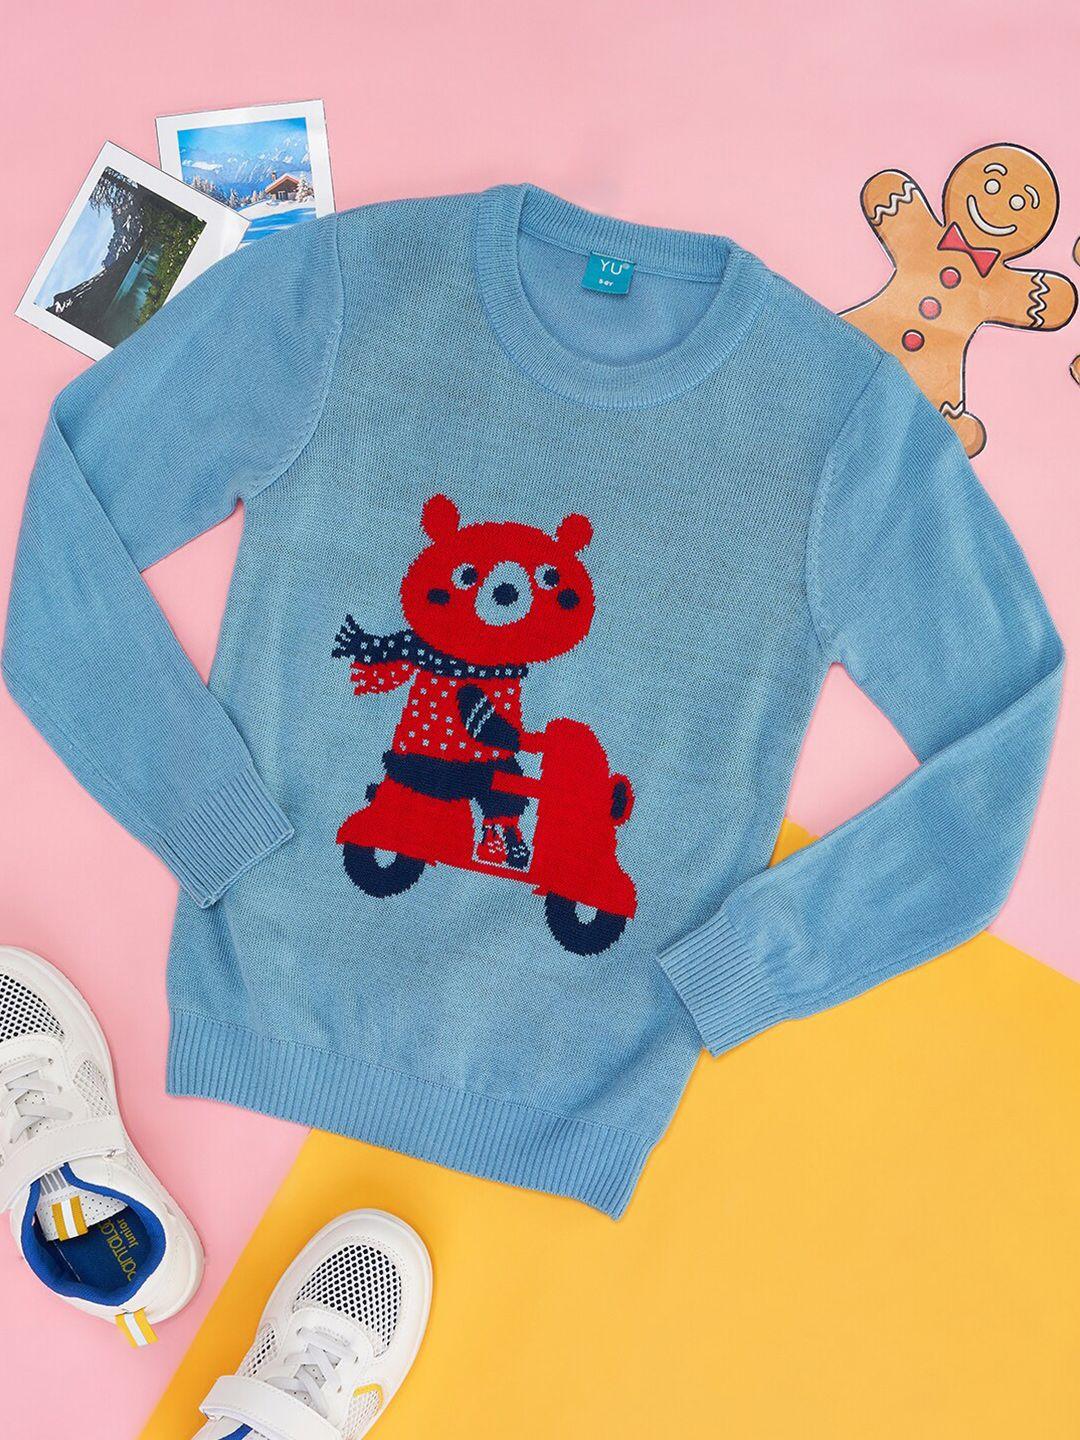 yu-by-pantaloons-boys-graphic-printed-round-neck-pullover-sweater